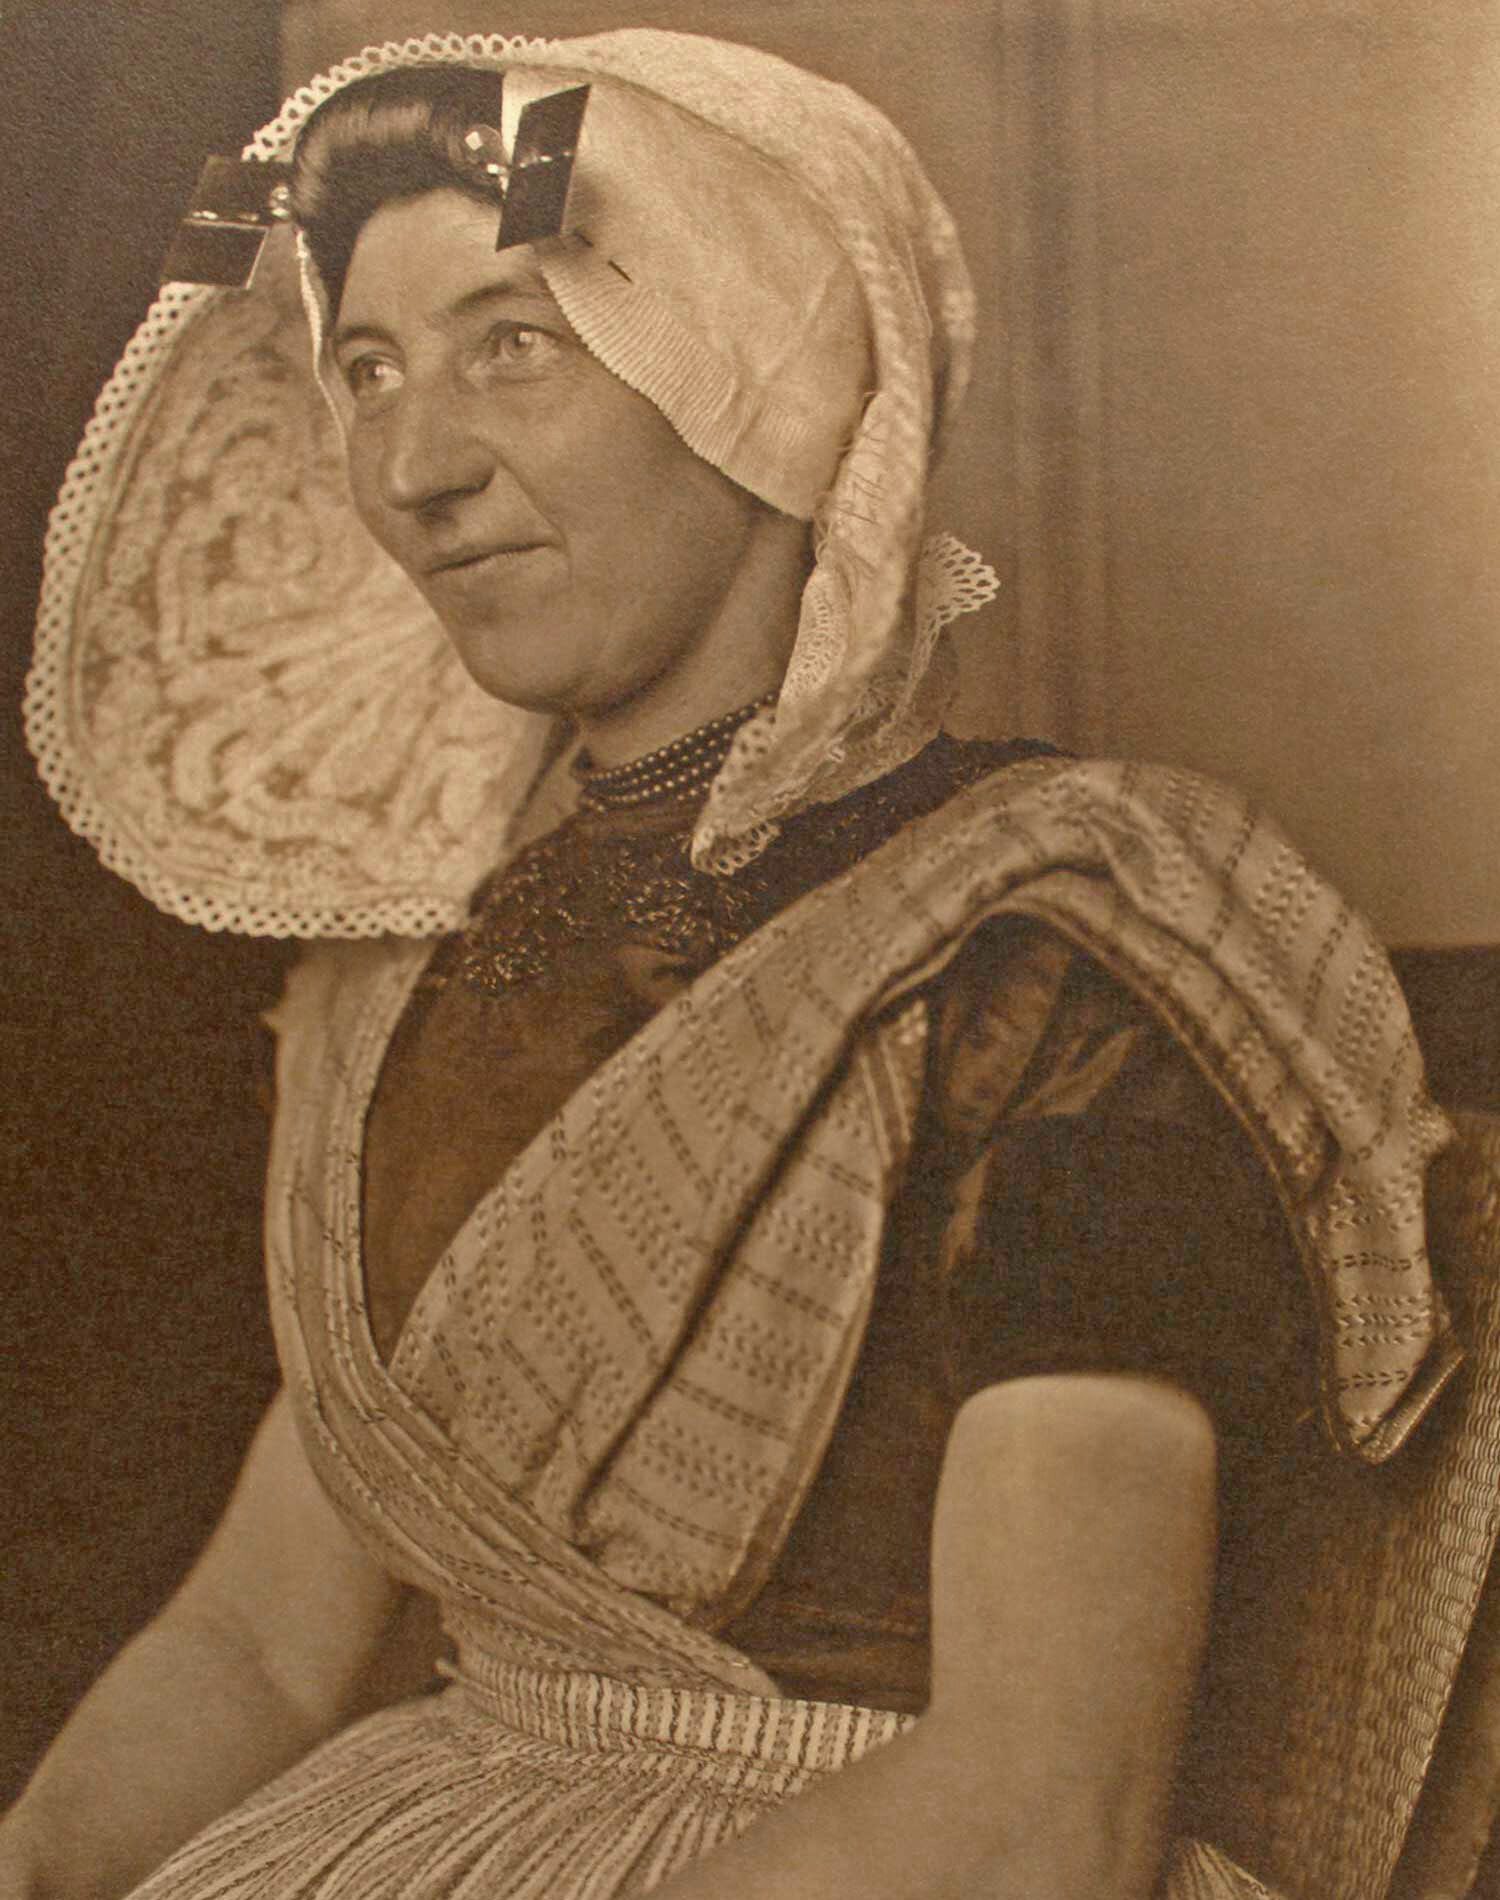 Protestant woman from Zuid-Beveland, province of Zeeland, The Netherlands